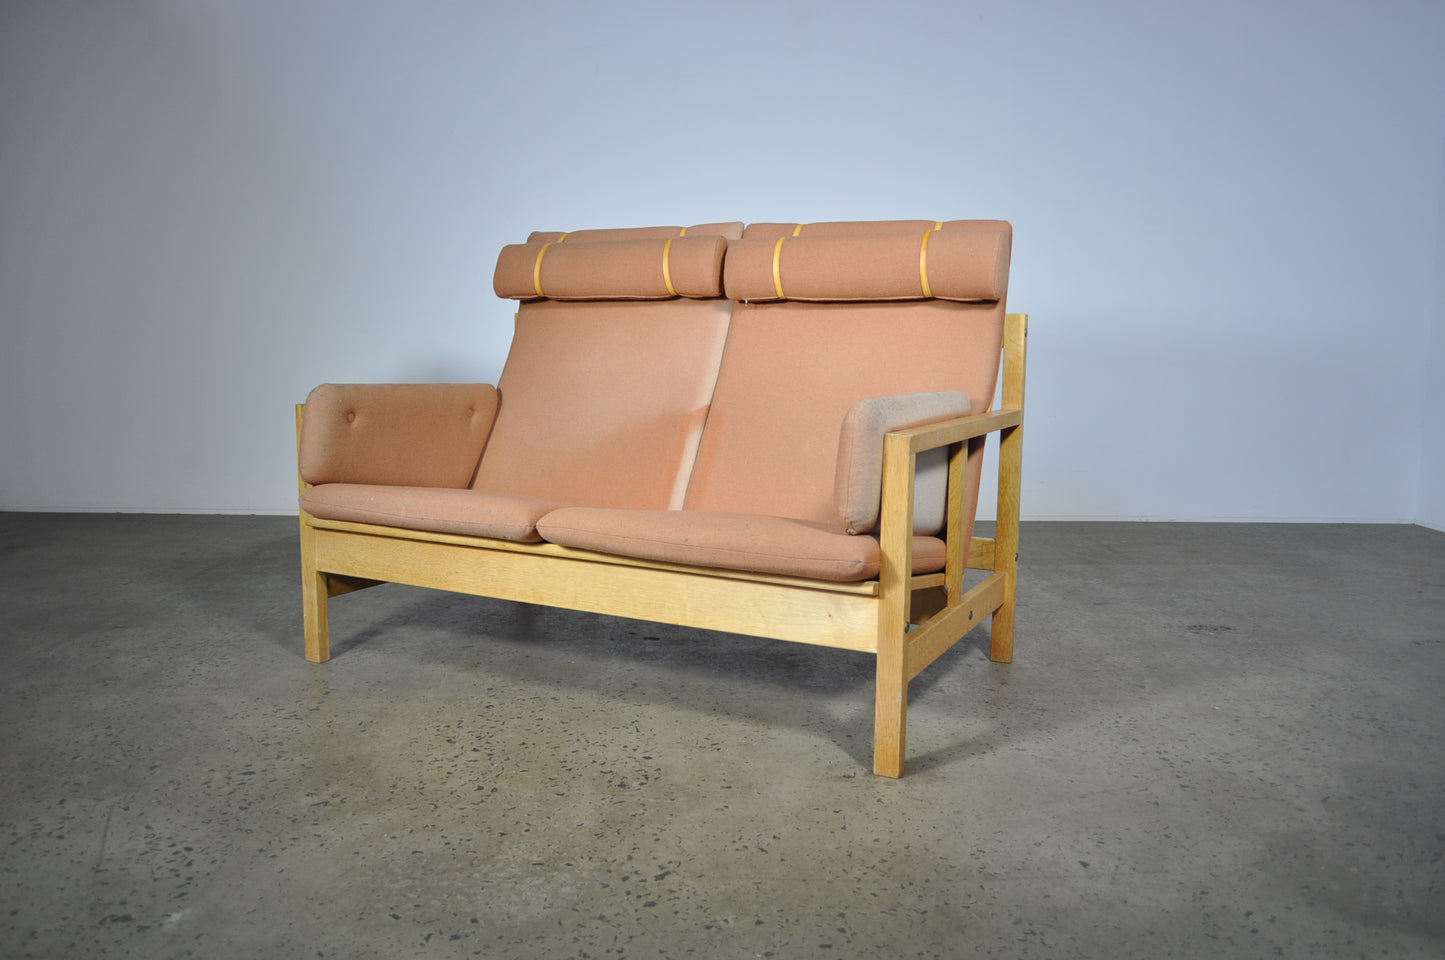 Two Seat Sofa by Børge Mogensen for Fredericia. To be restored.